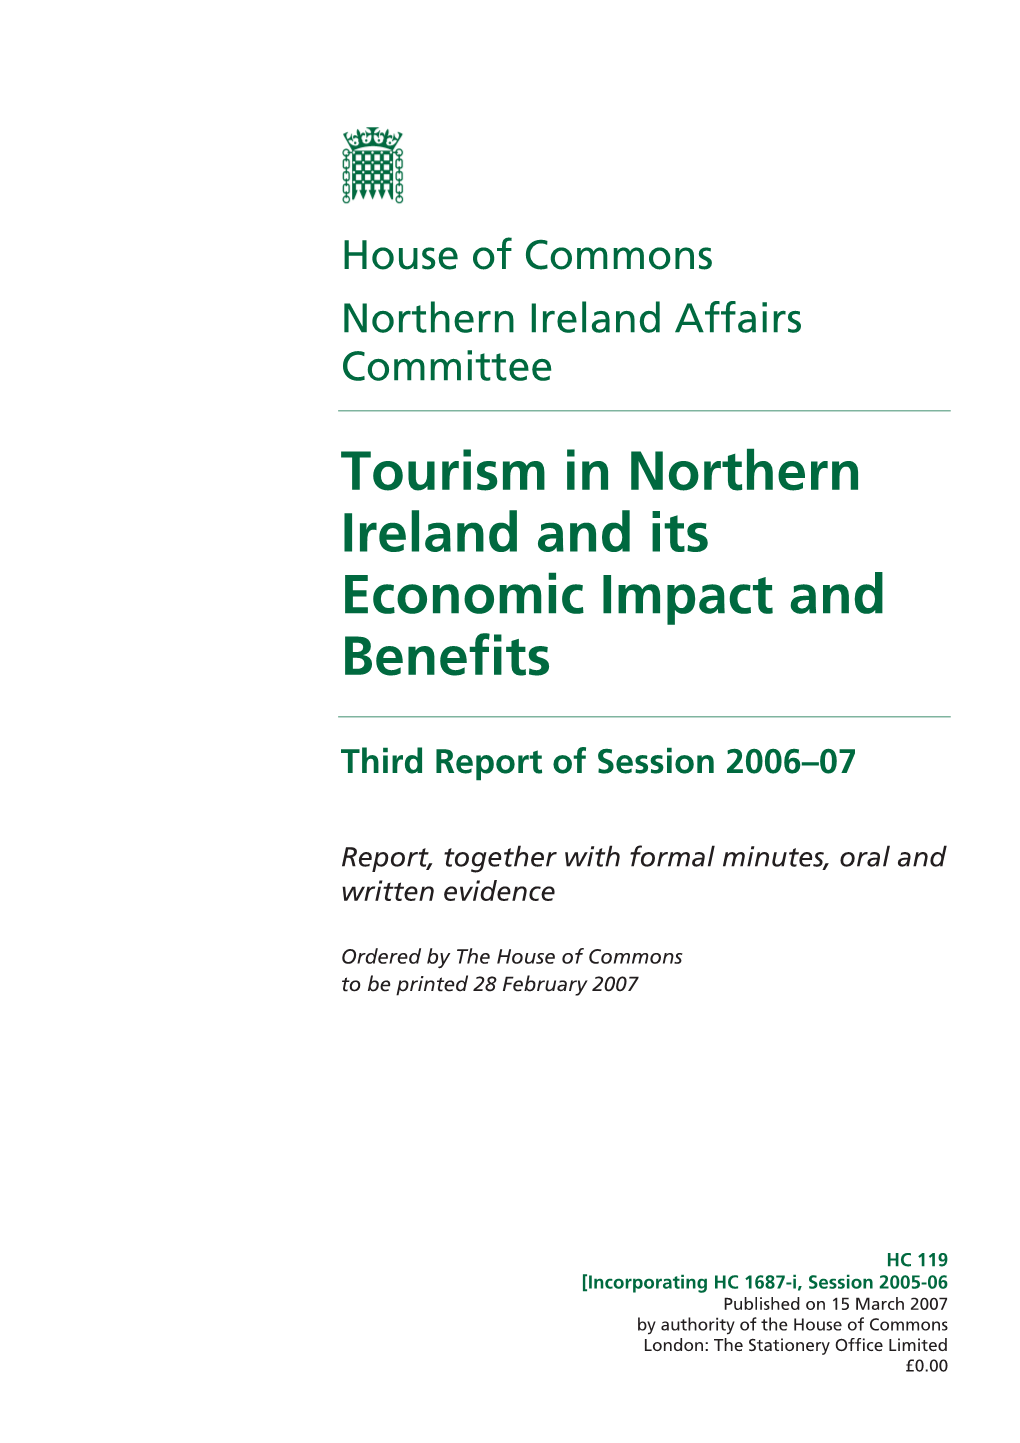 Tourism in Northern Ireland and Its Economic Impact and Benefits